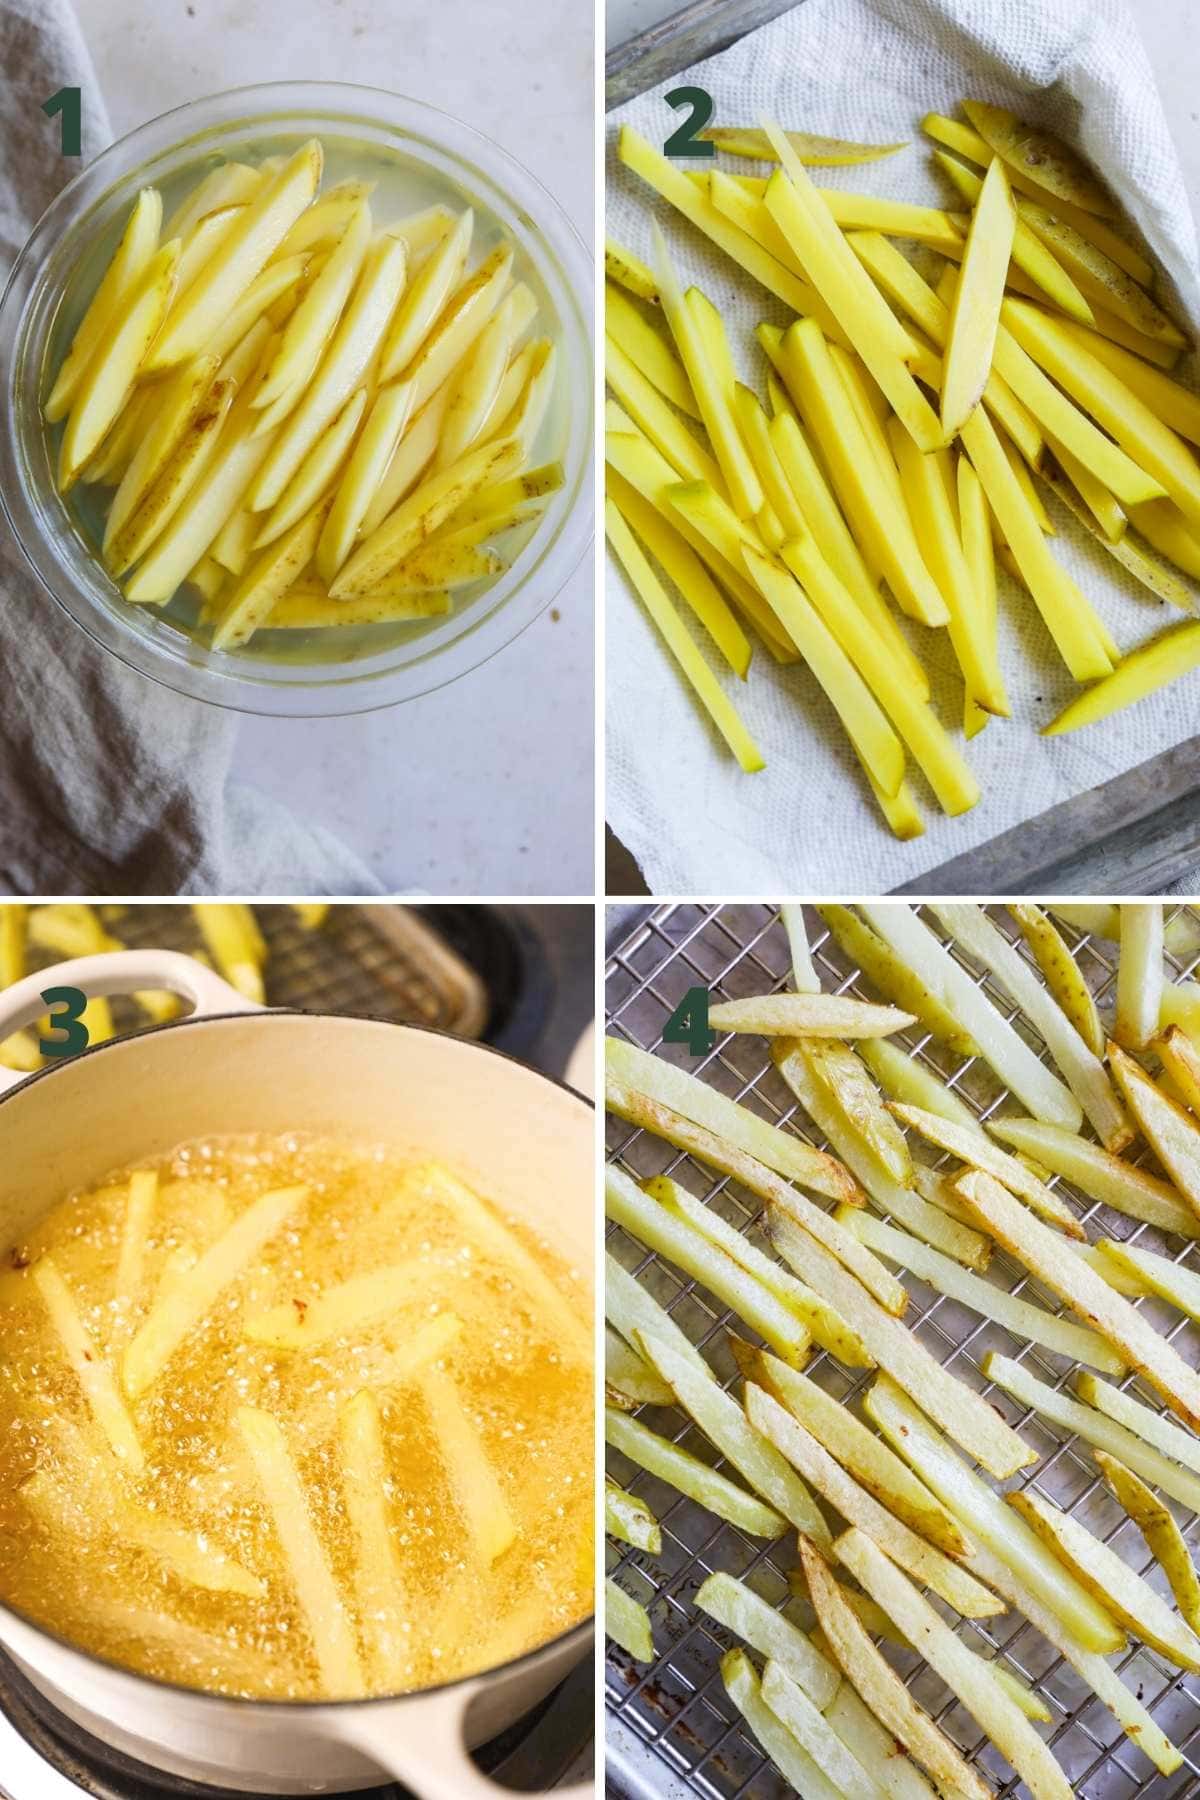 Steps to make fries for spicy cajun fries.